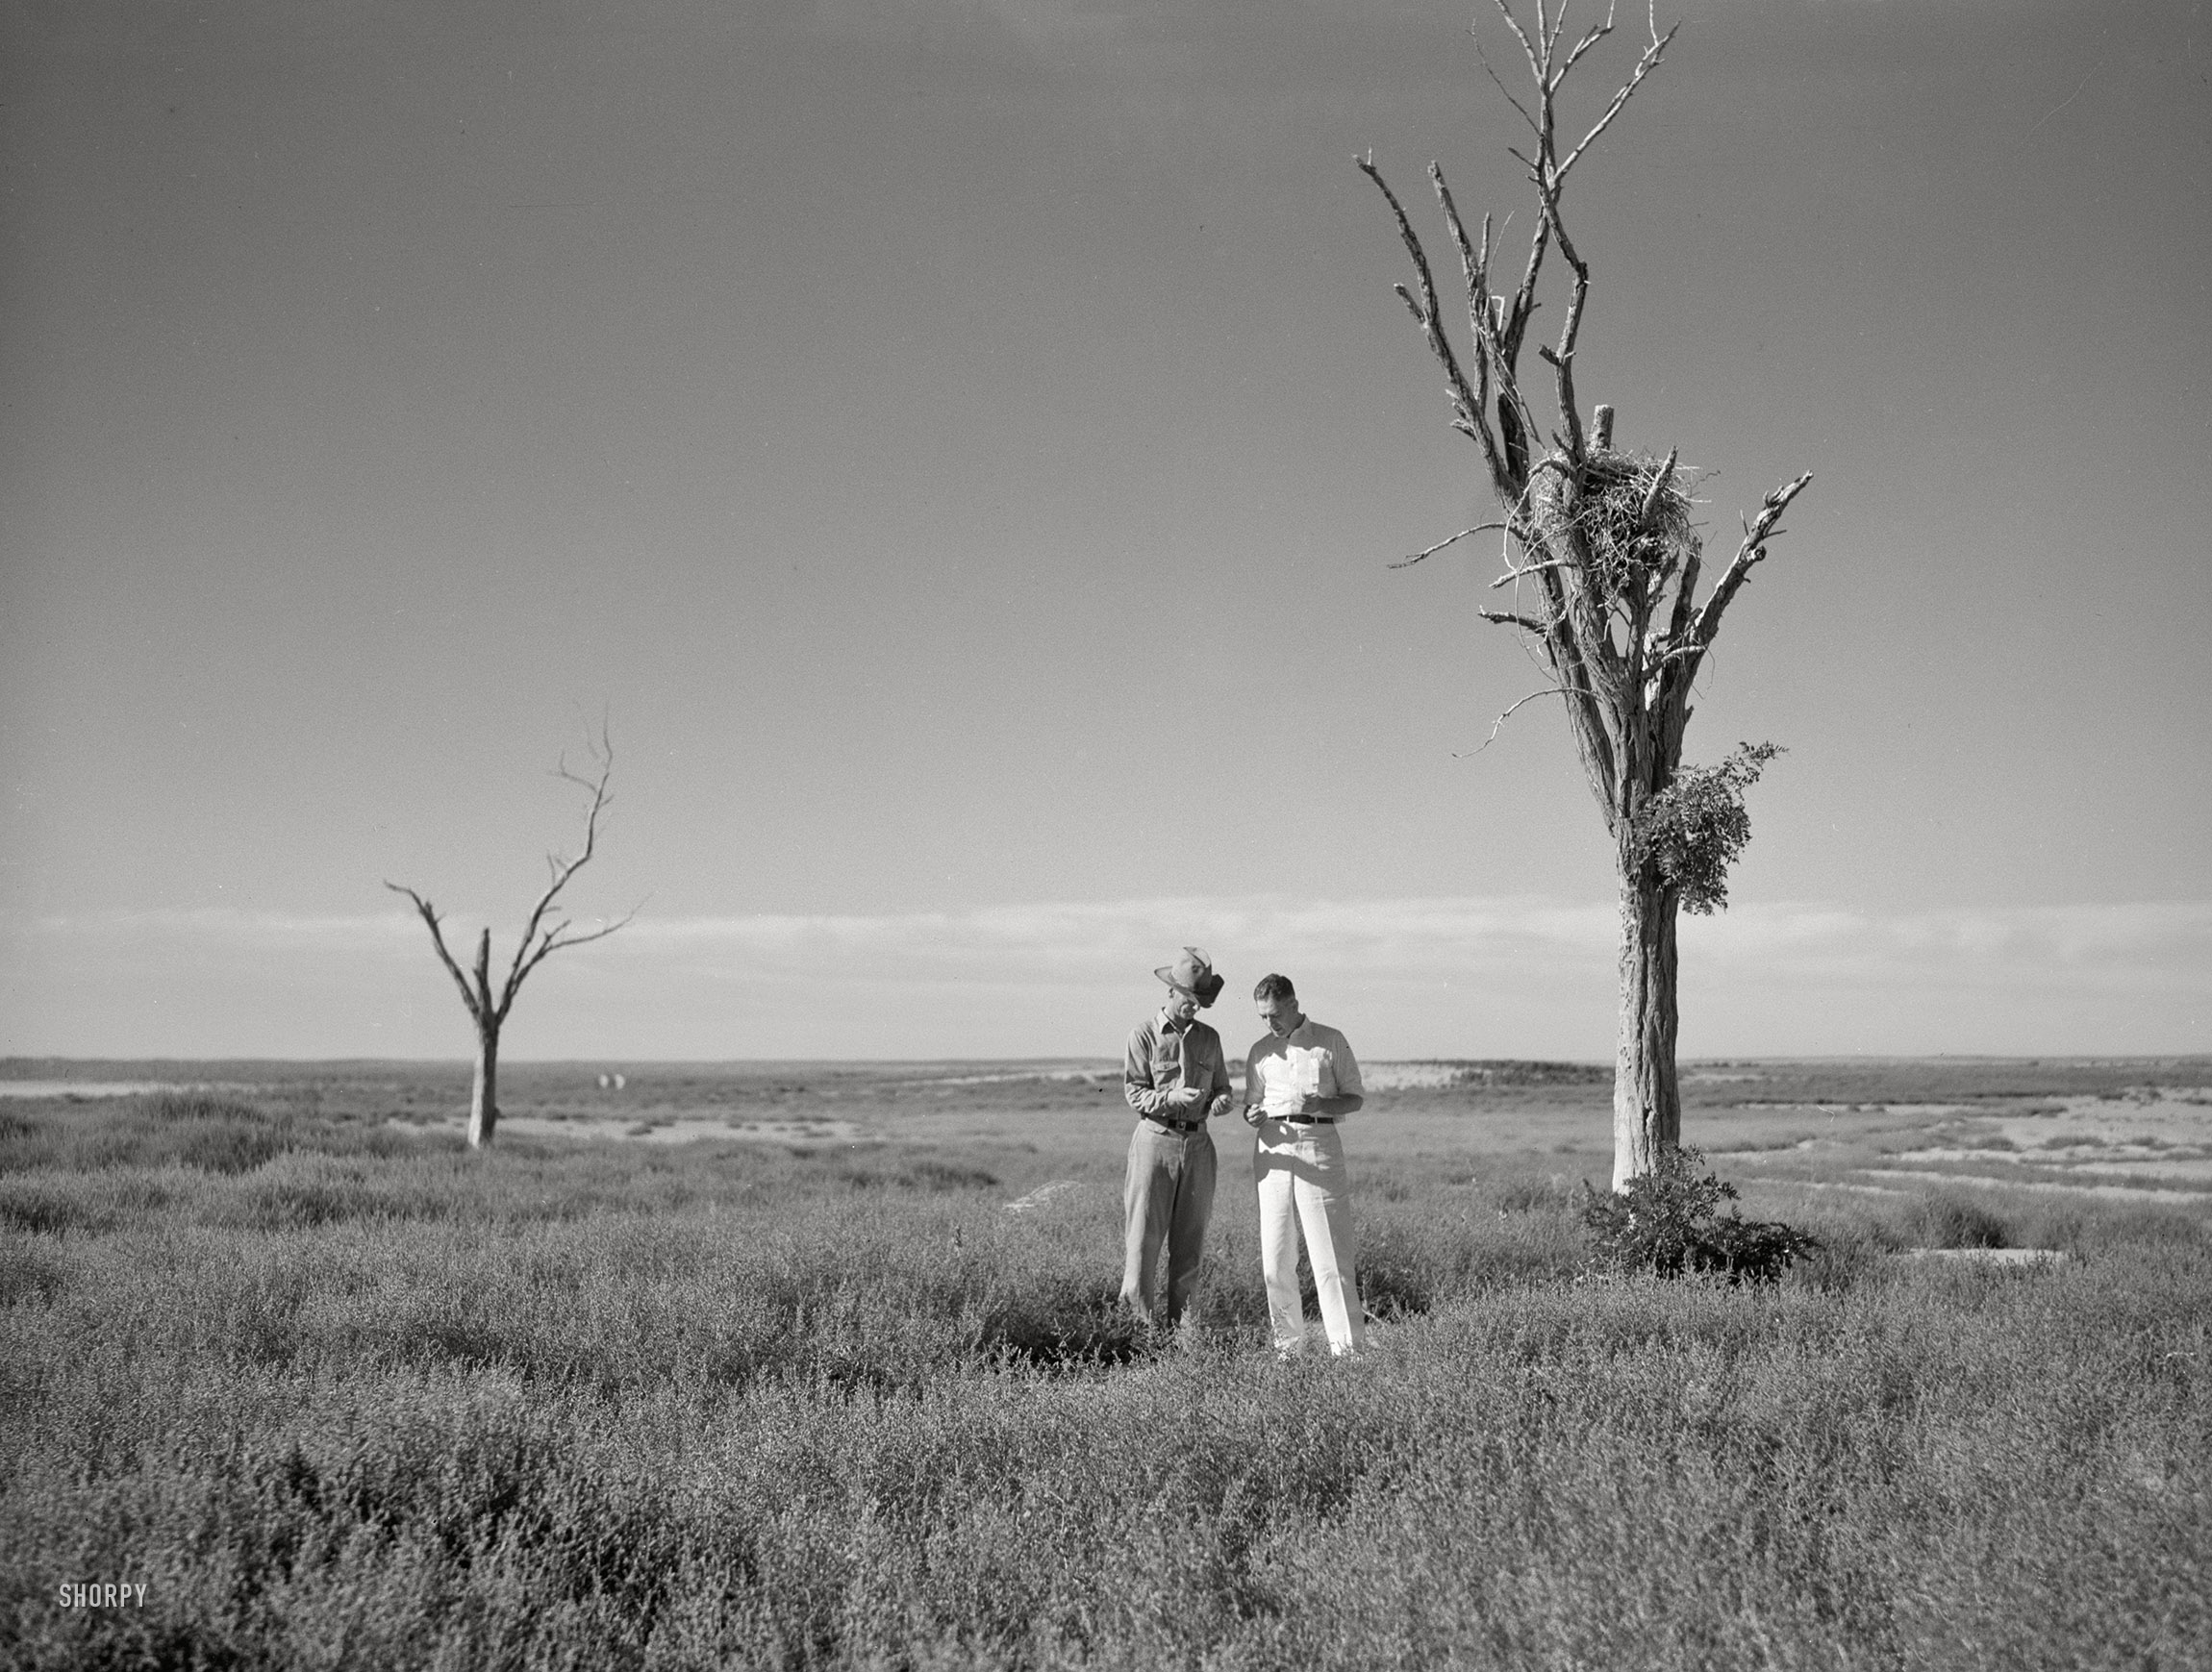 Summer 1936. "President's Report. Dr. Tugwell and farmer of dust bowl area in Texas Panhandle." Resettlement Administration head, New Deal "Brain Trust" strategist and future Puerto Rico governor Rexford Tugwell in the field. Medium-format nitrate negative by Arthur Rothstein. View full size.